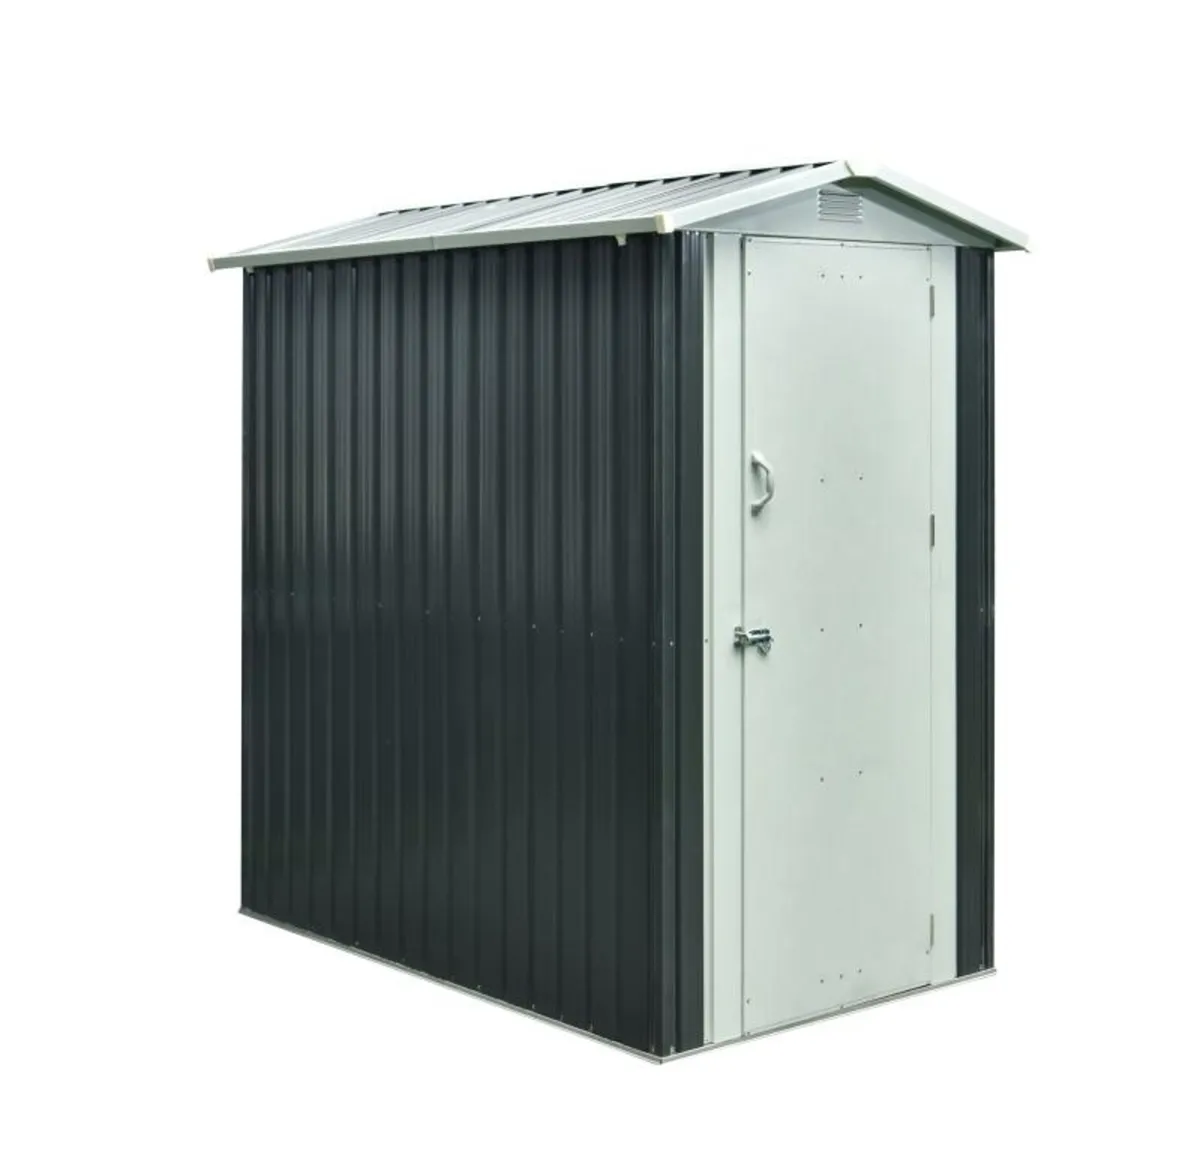 4ft x 6ft Steel Shed